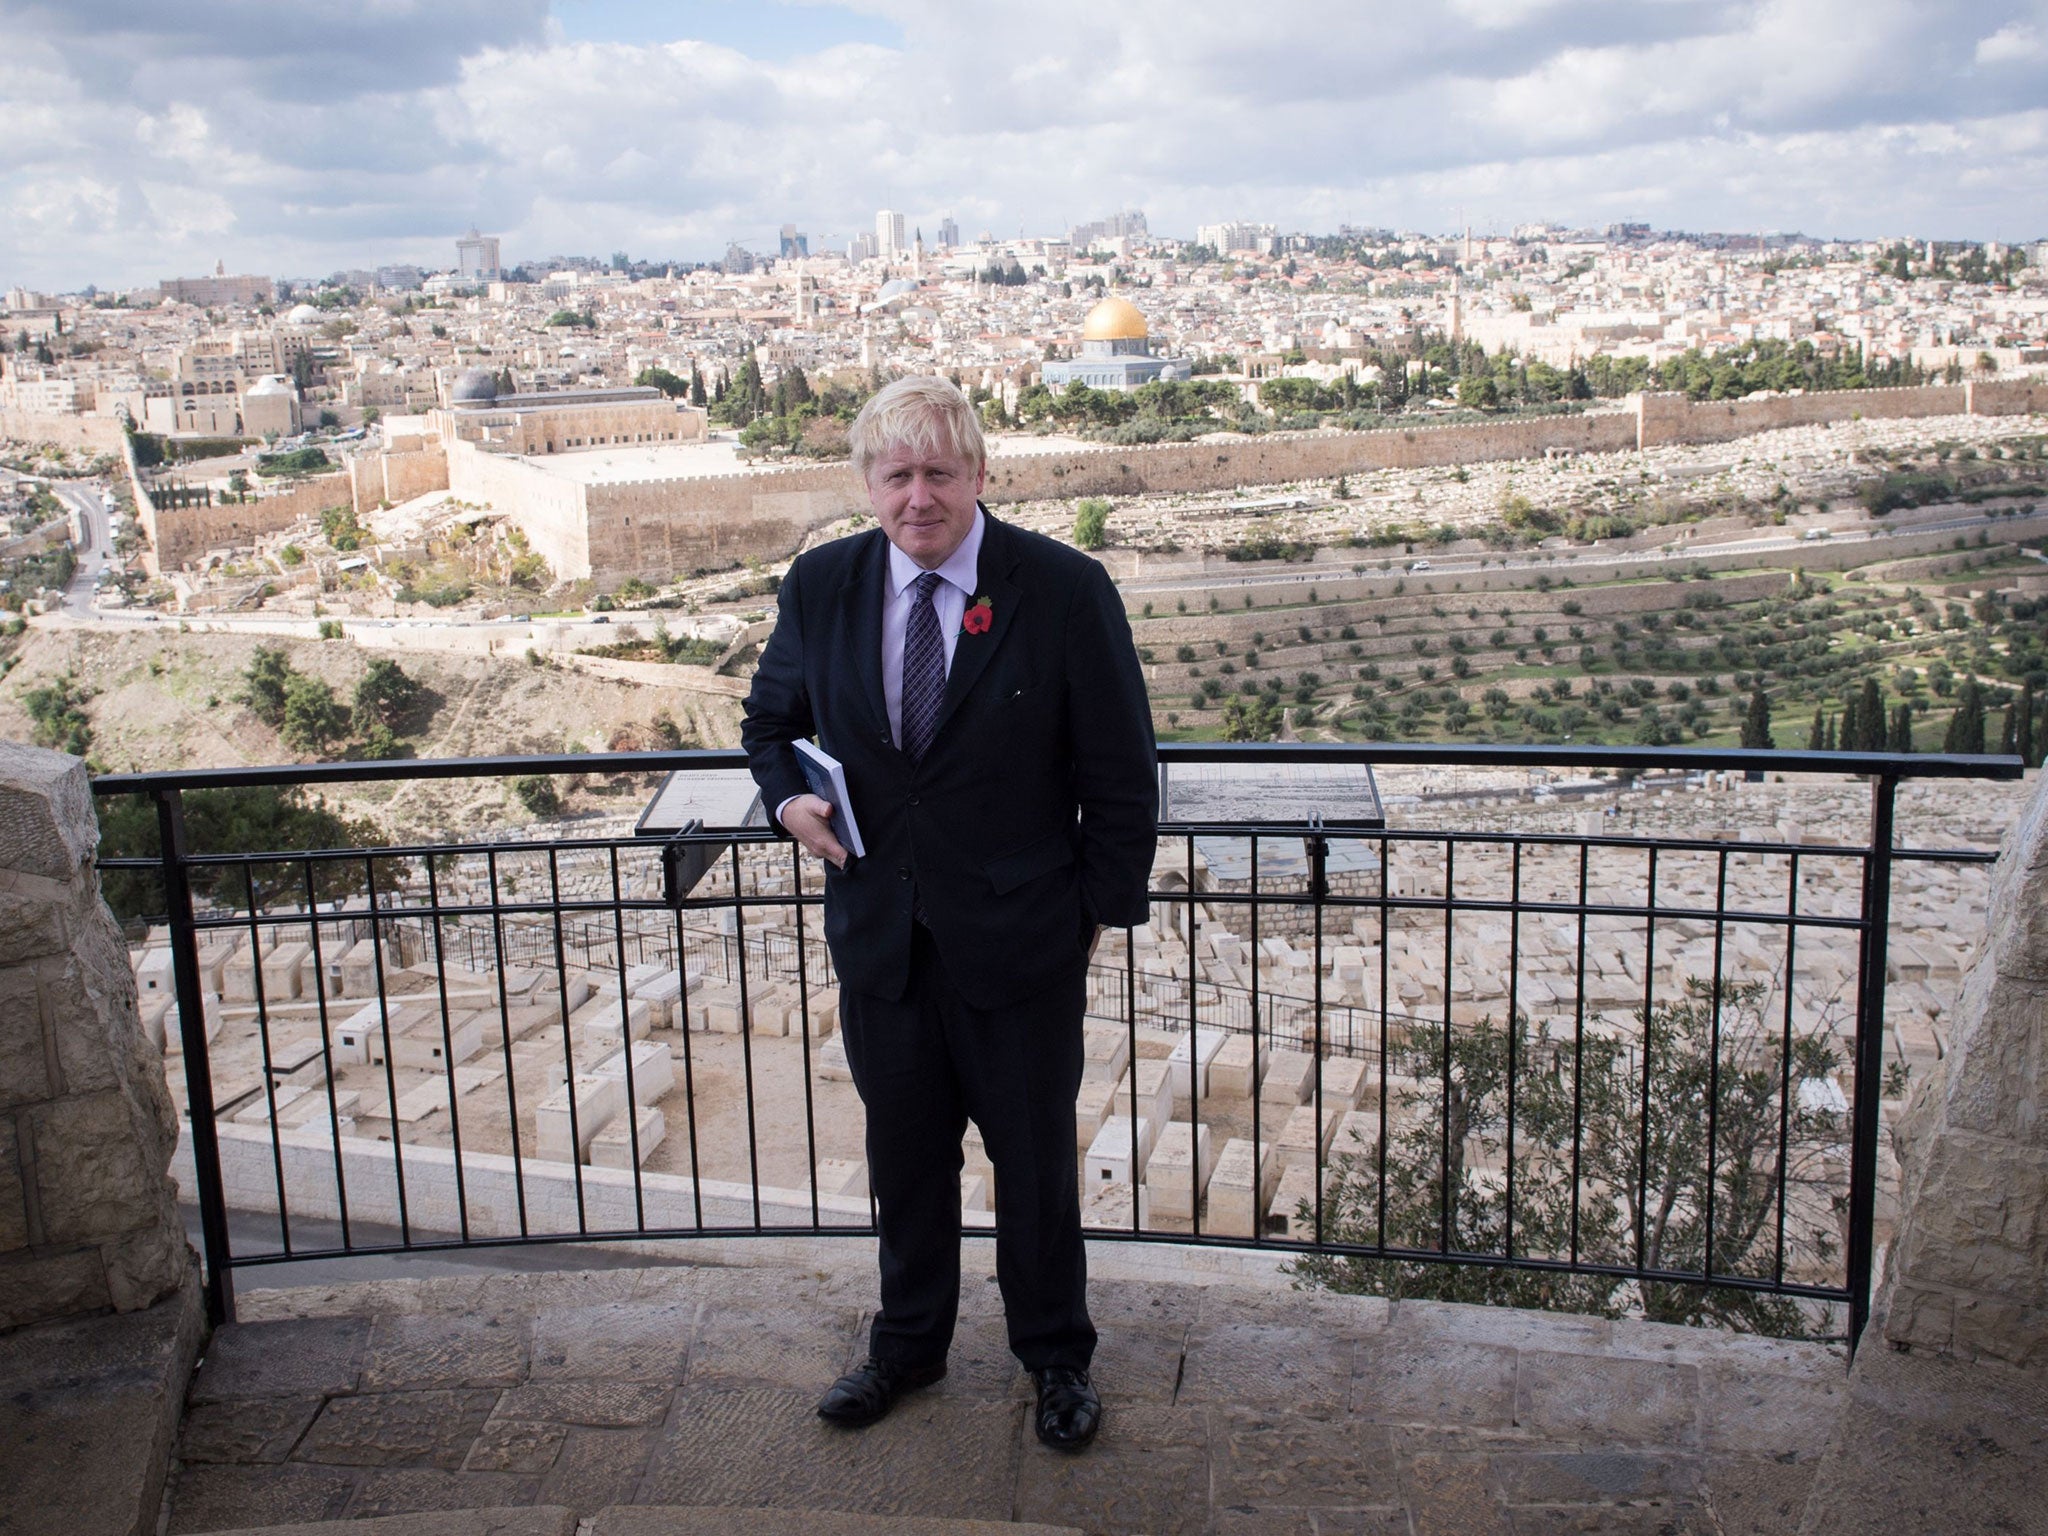 Mayor of London Boris Johnson looks out over the Old City of Jerusalem during his the last day of his visit on 11 November